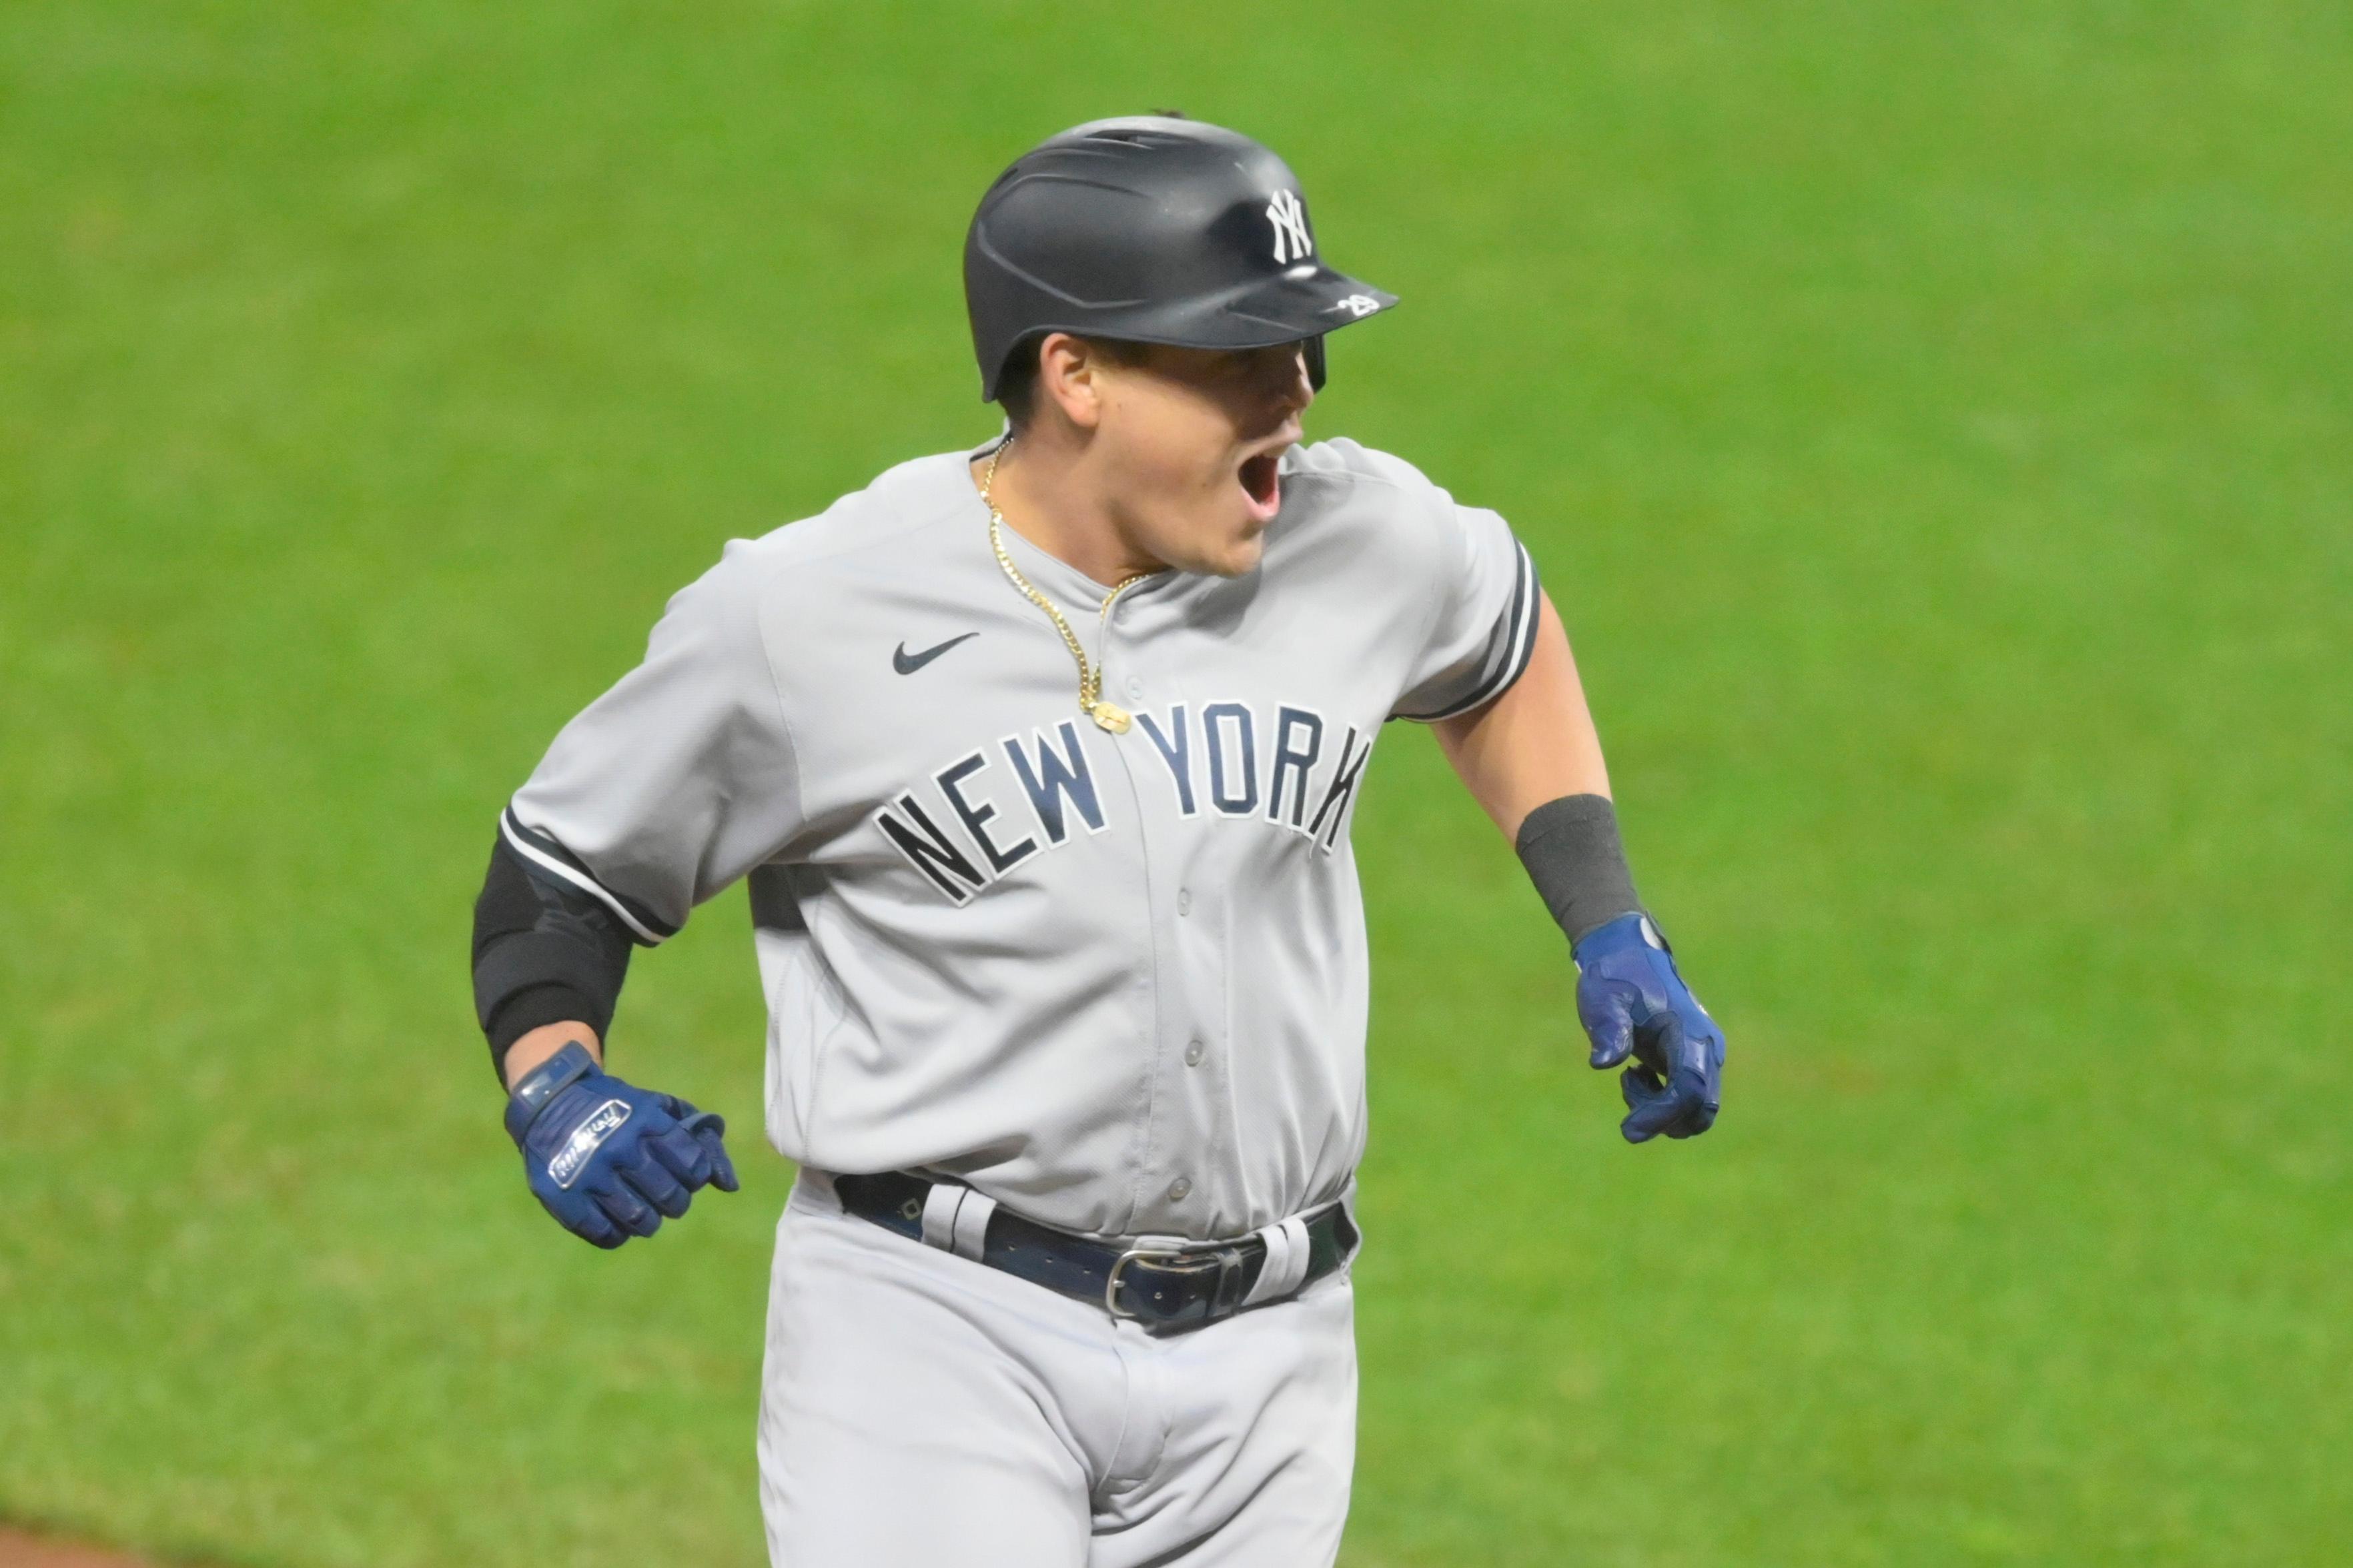 New York Yankees third baseman Gio Urshela (29) celebrates his grand slam in the fourth inning against the Cleveland Indians at Progressive Field. / David Richard - USA Today Sports